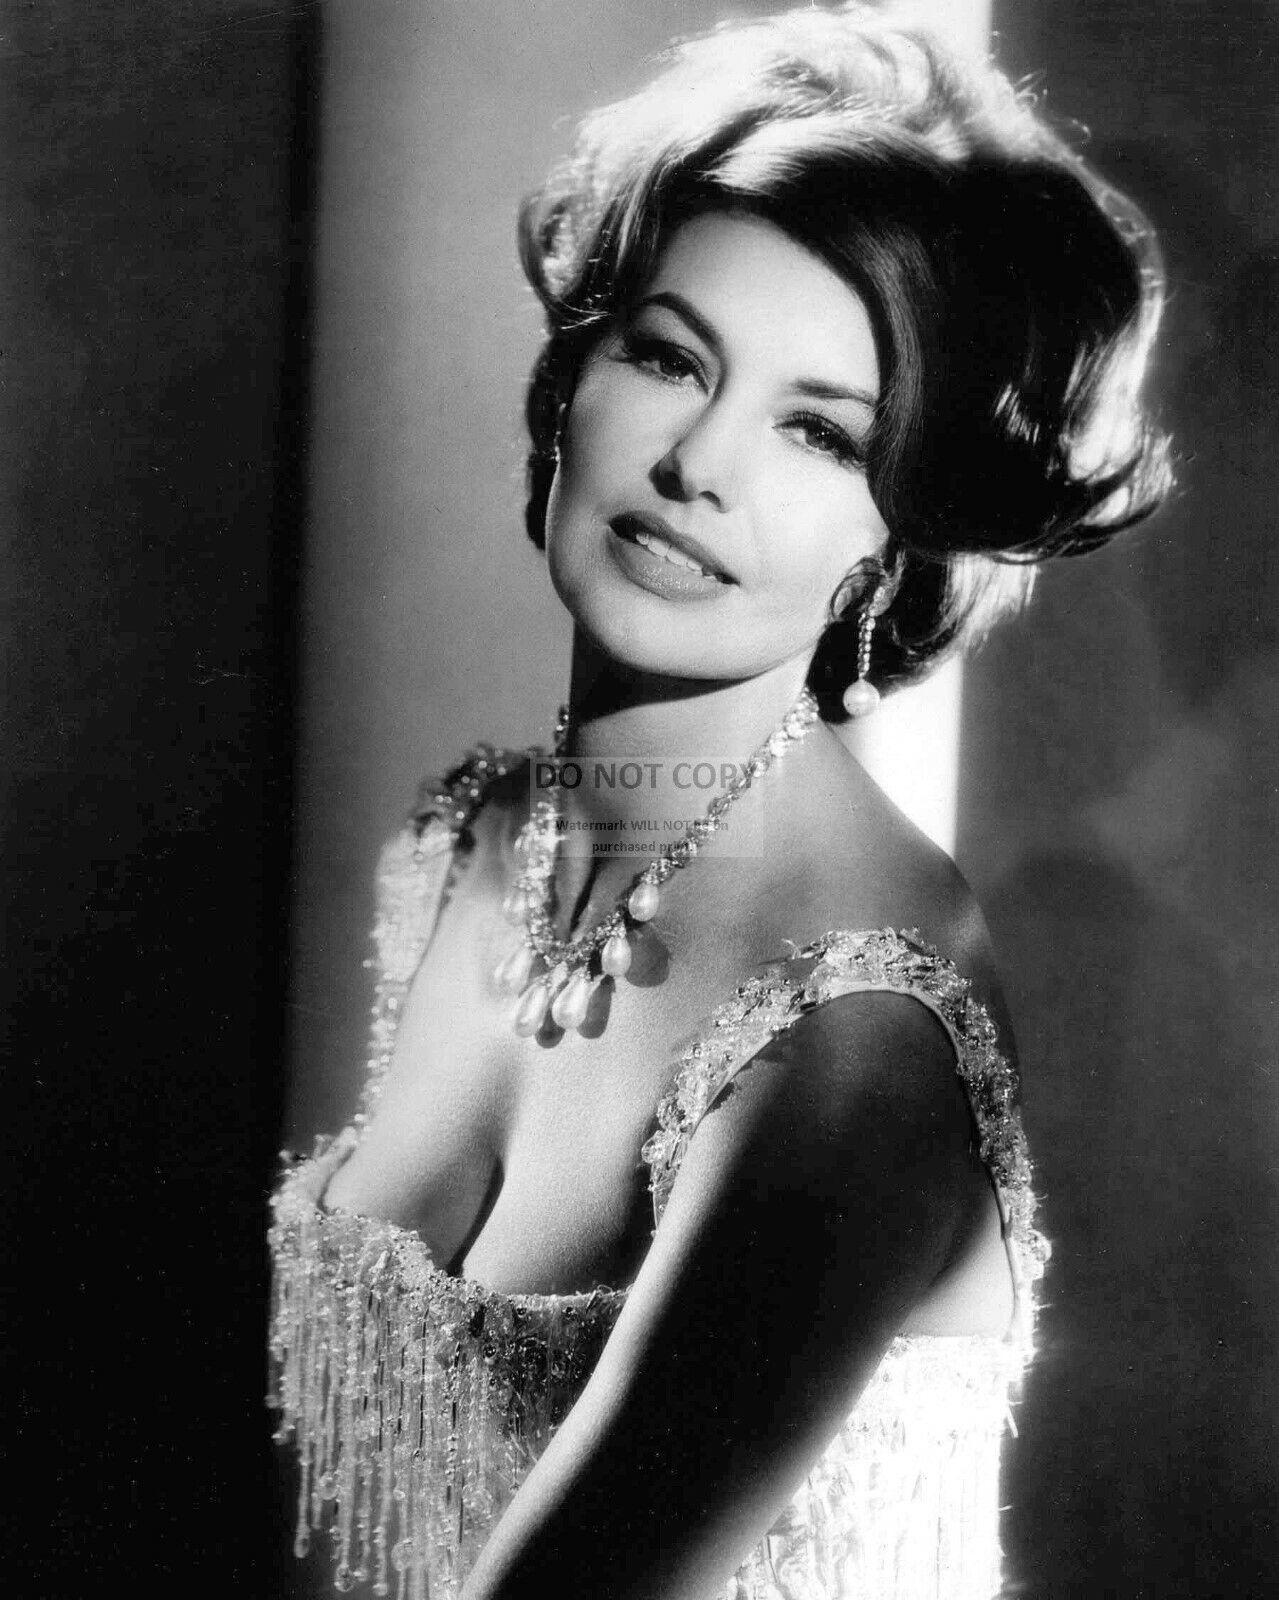 CYD CHARISSE ACTRESS AND DANCER - 8X10 PUBLICITY PHOTO (DD513)